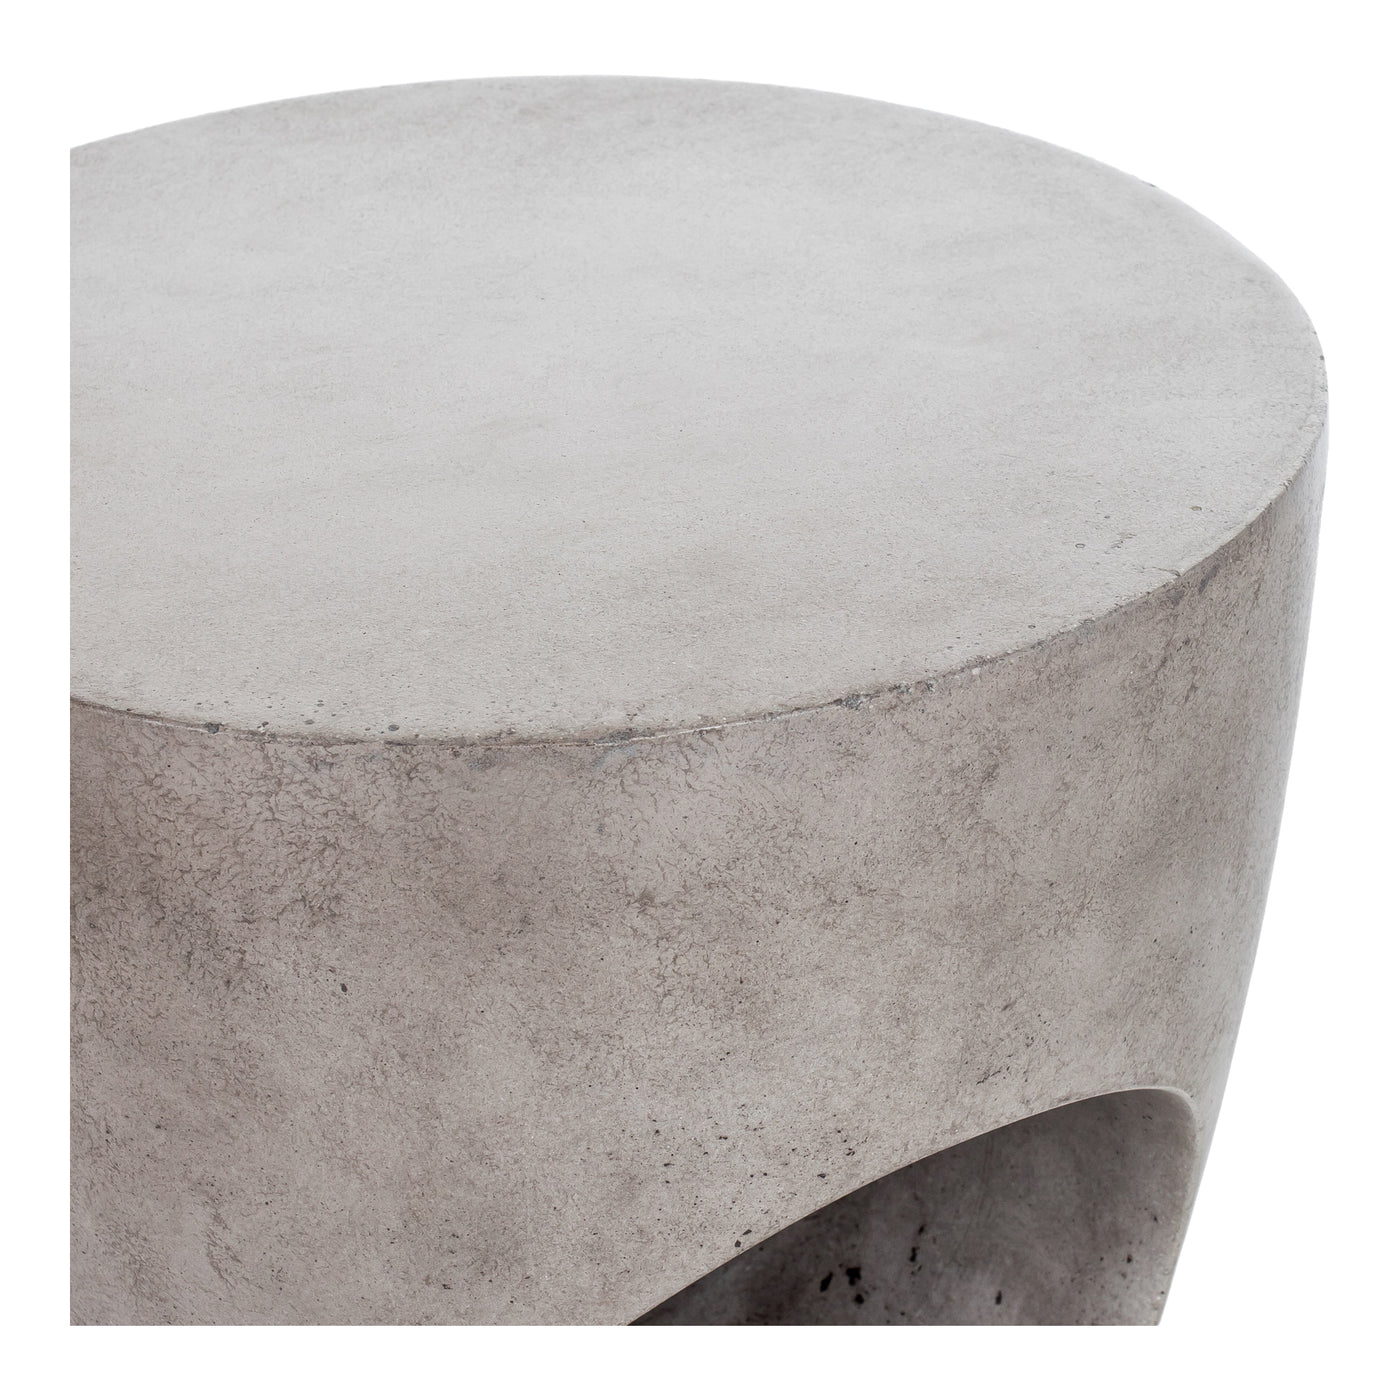 Our outdoor tables are made with a high quality concrete and fiber mix, to give them the cool, modern look you want, but k...